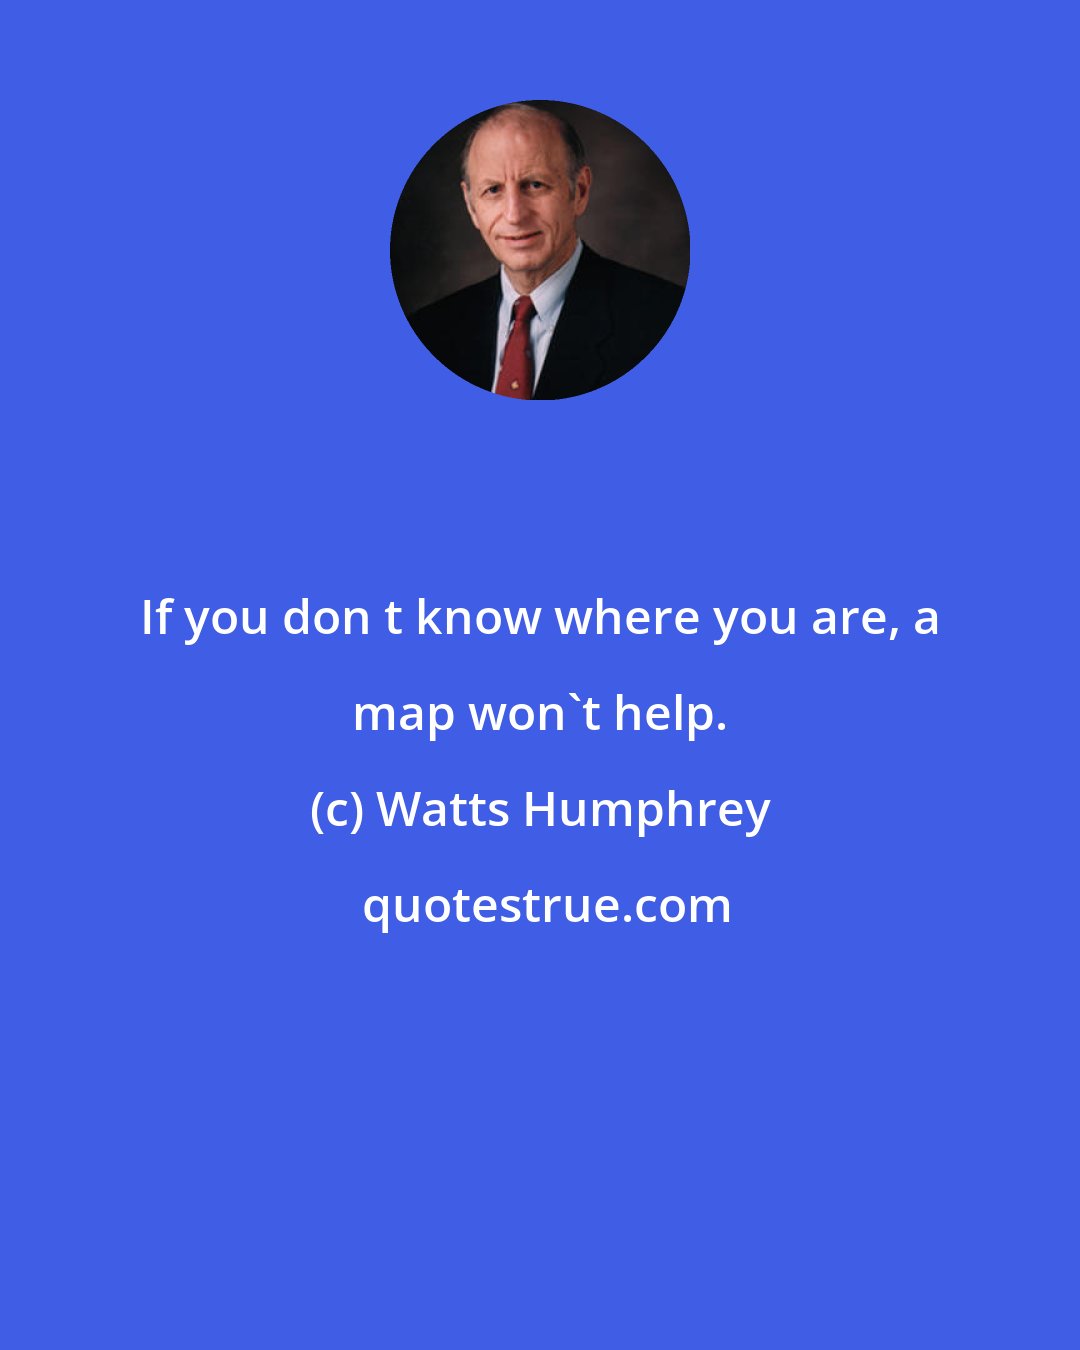 Watts Humphrey: If you don t know where you are, a map won't help.